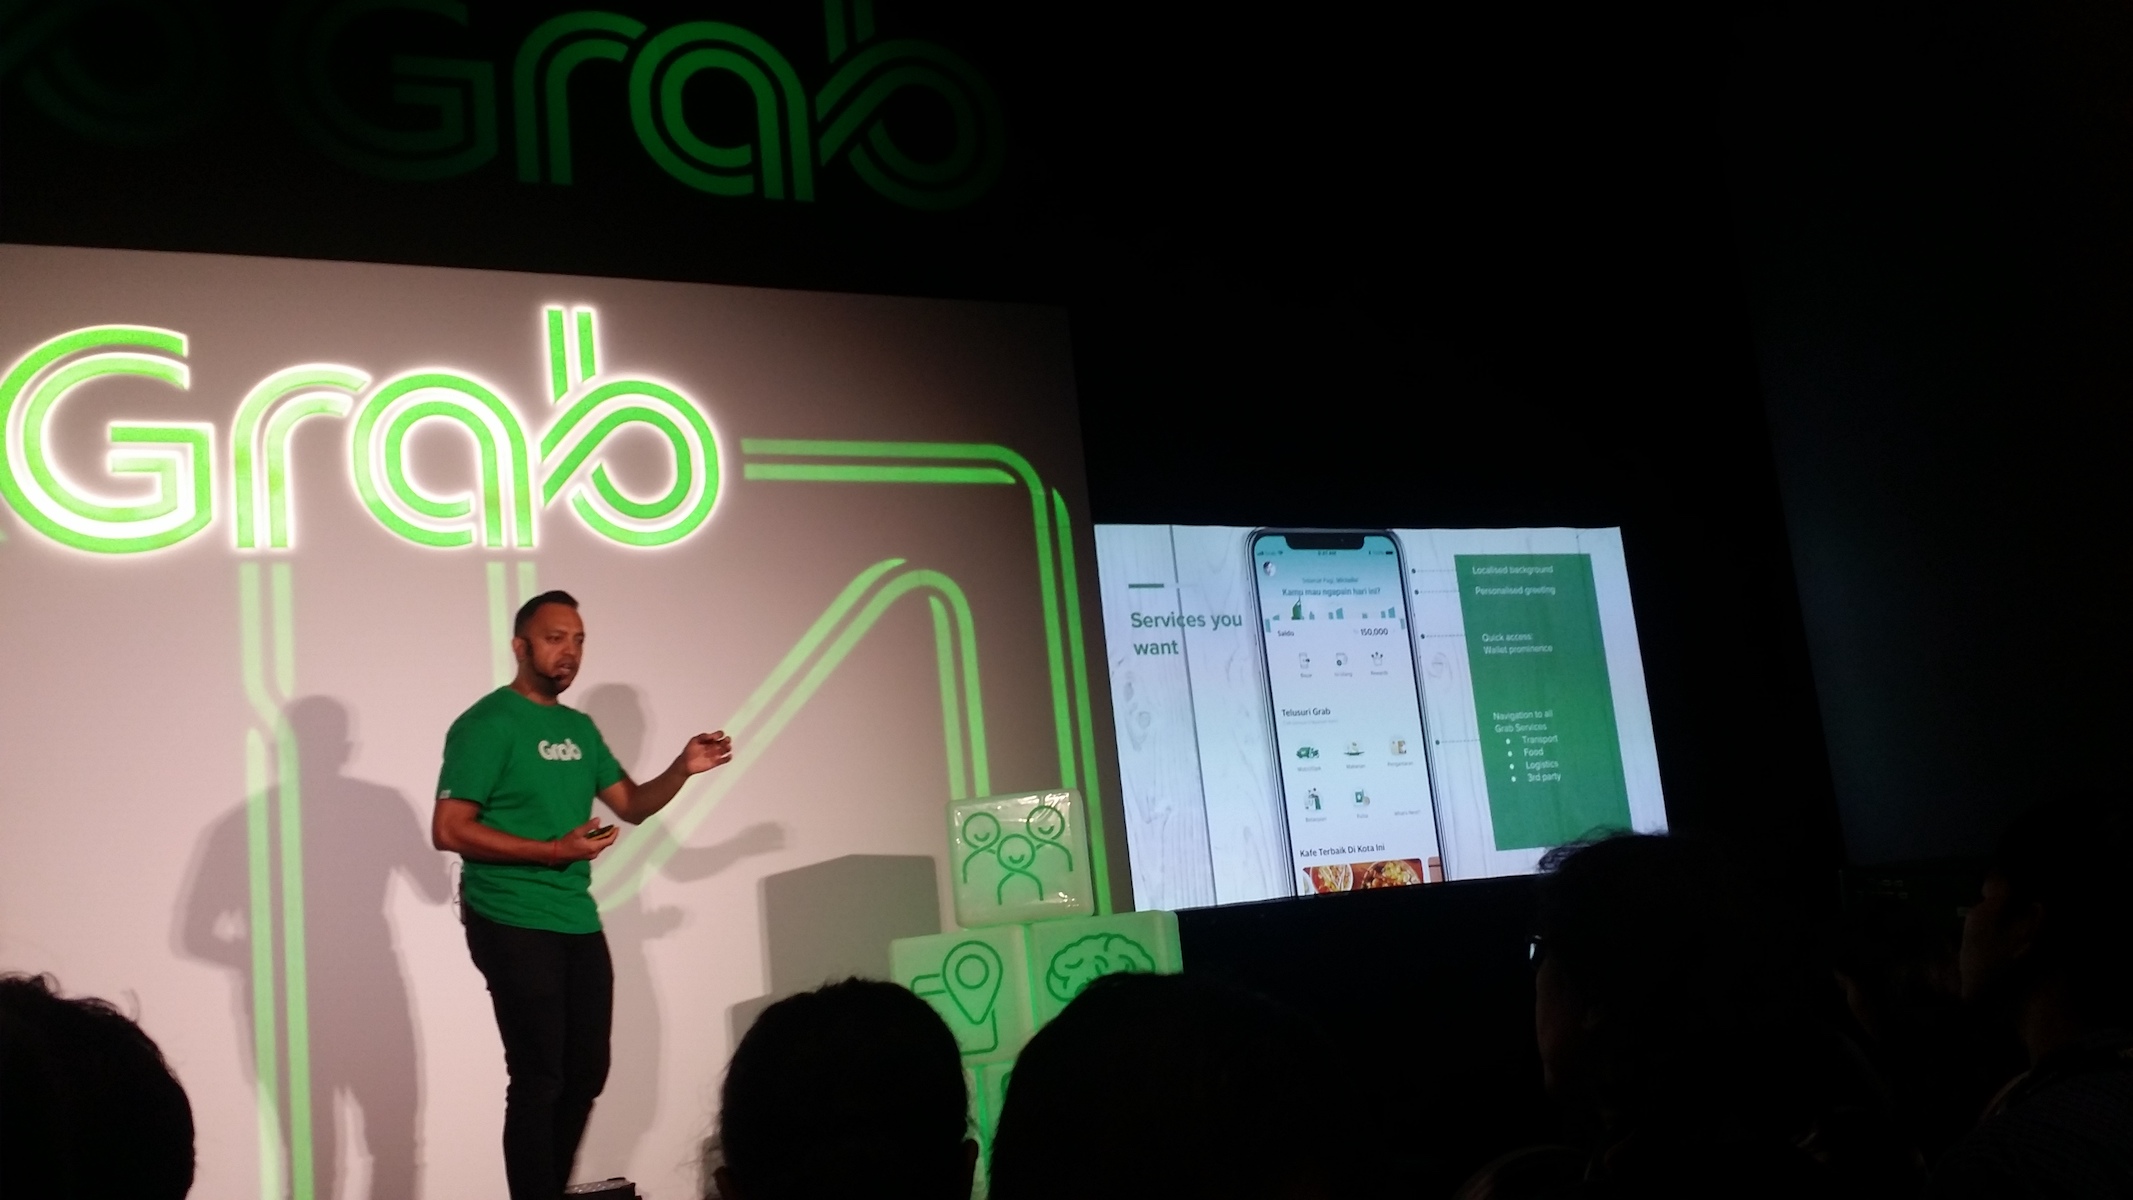 SoftBank to invest in Grab’s Series H, boosting the latest round up to $5b